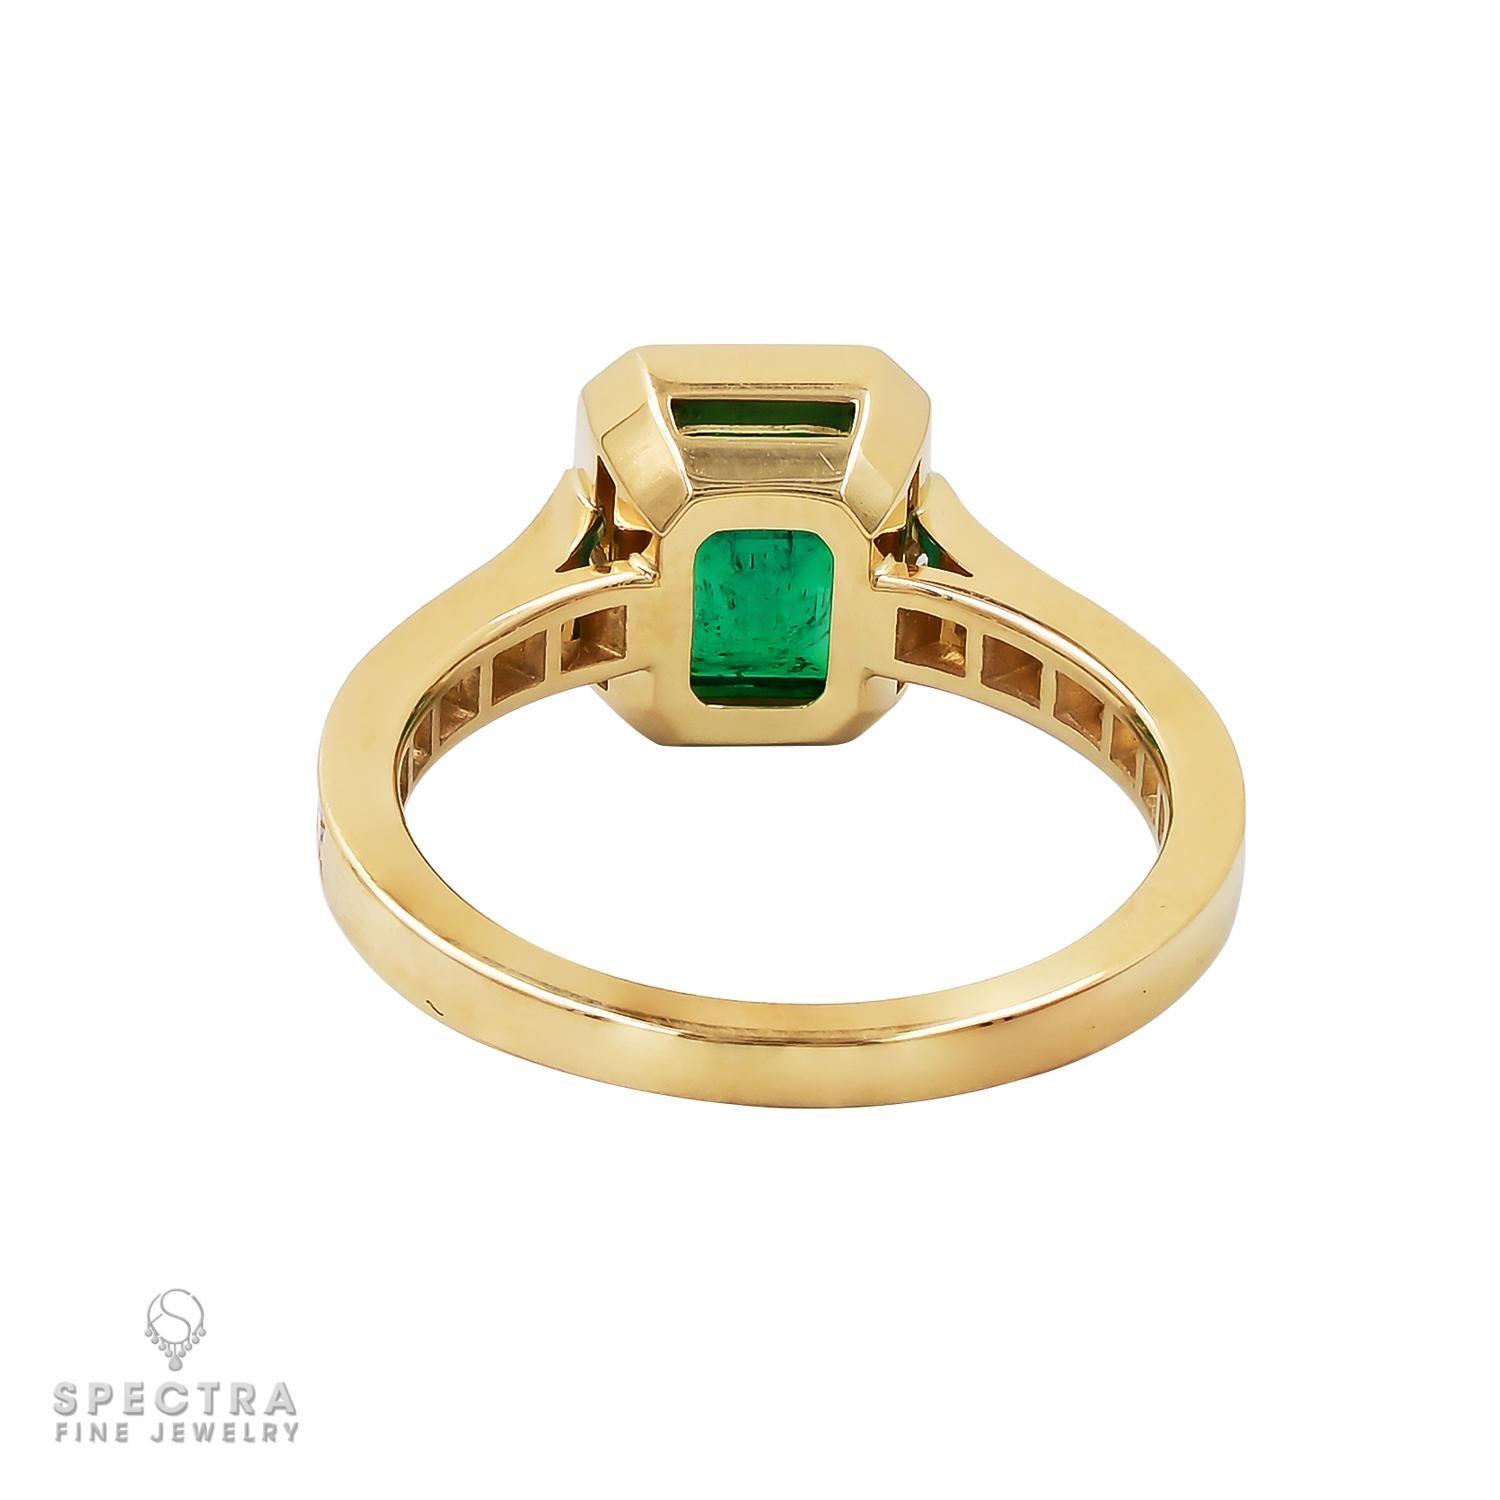 Contemporary Spectra Fine Jewelry GRS Certified 2.03 Carat Colombian Emerald Diamond Ring For Sale